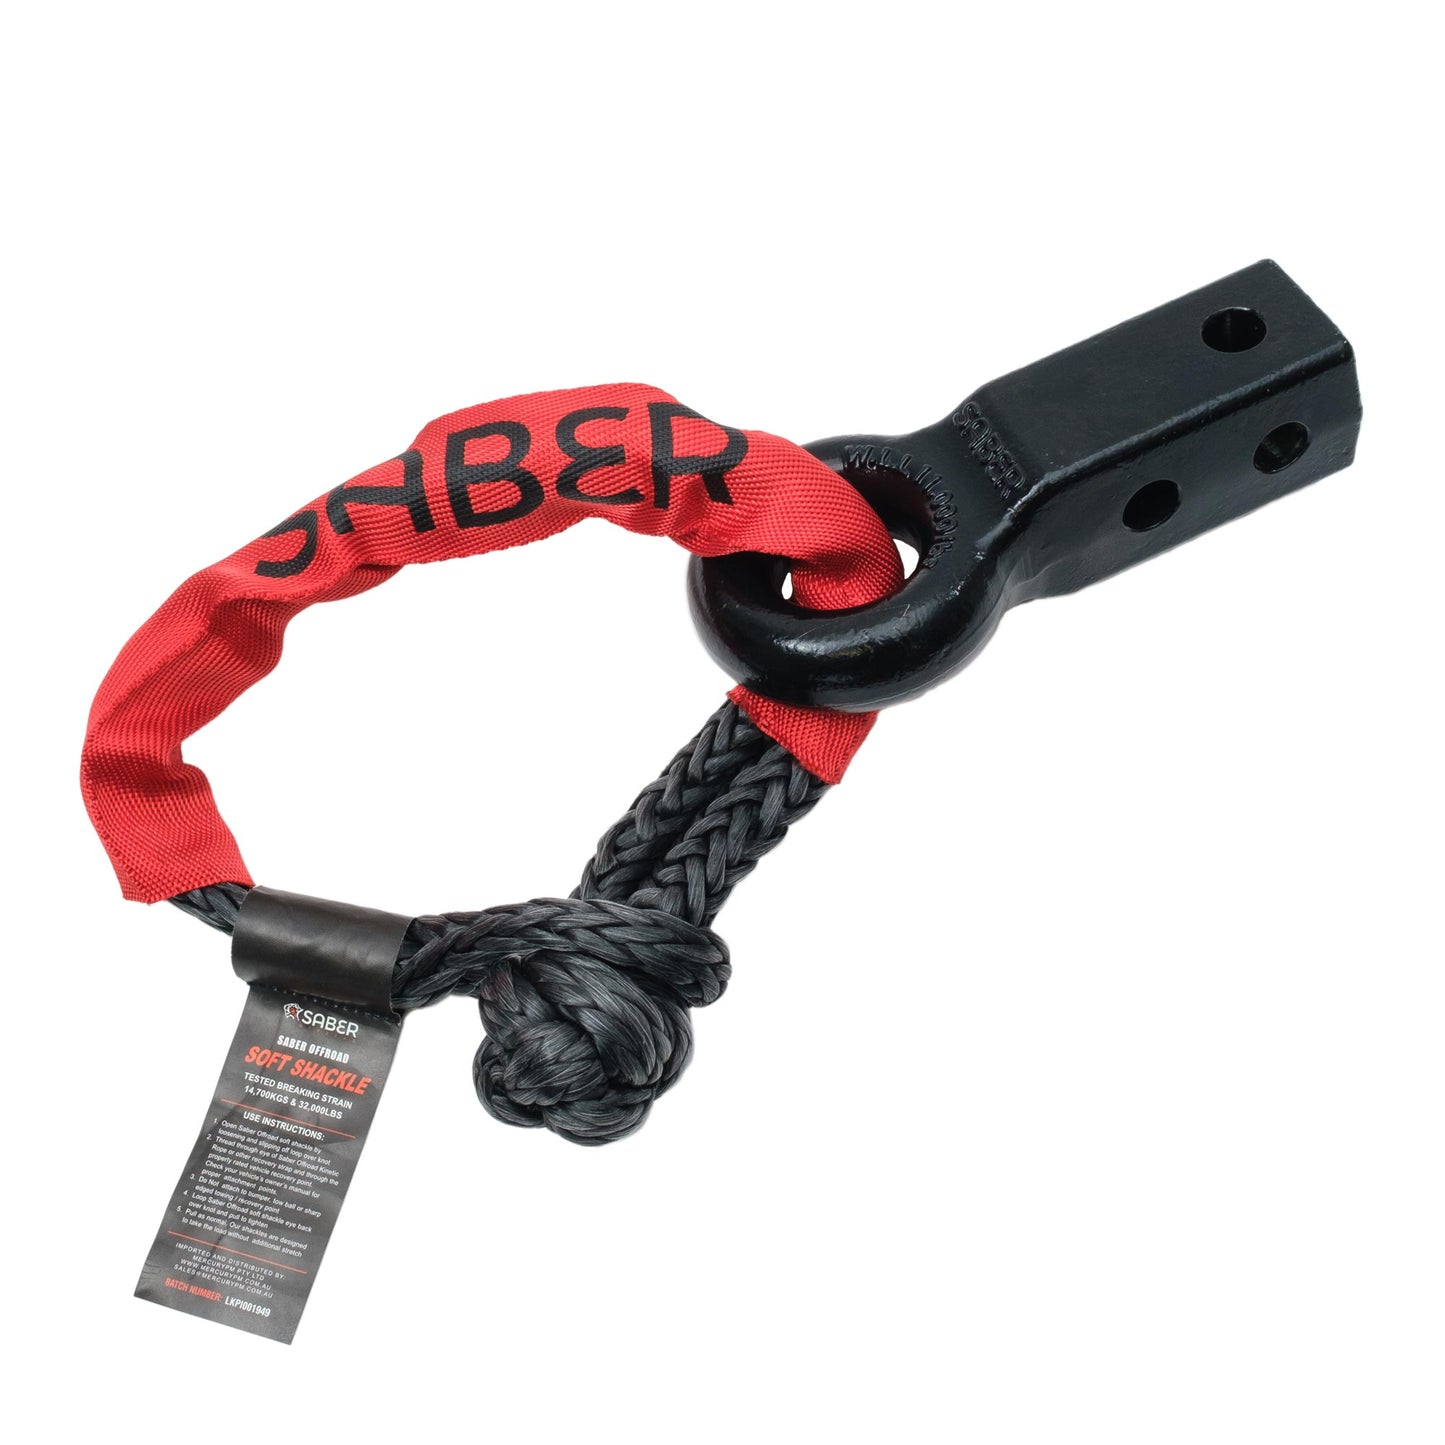 Saber Offroad - Rope Friendly Recovery Hitch - Cast Steel &amp; Sheath Shackle